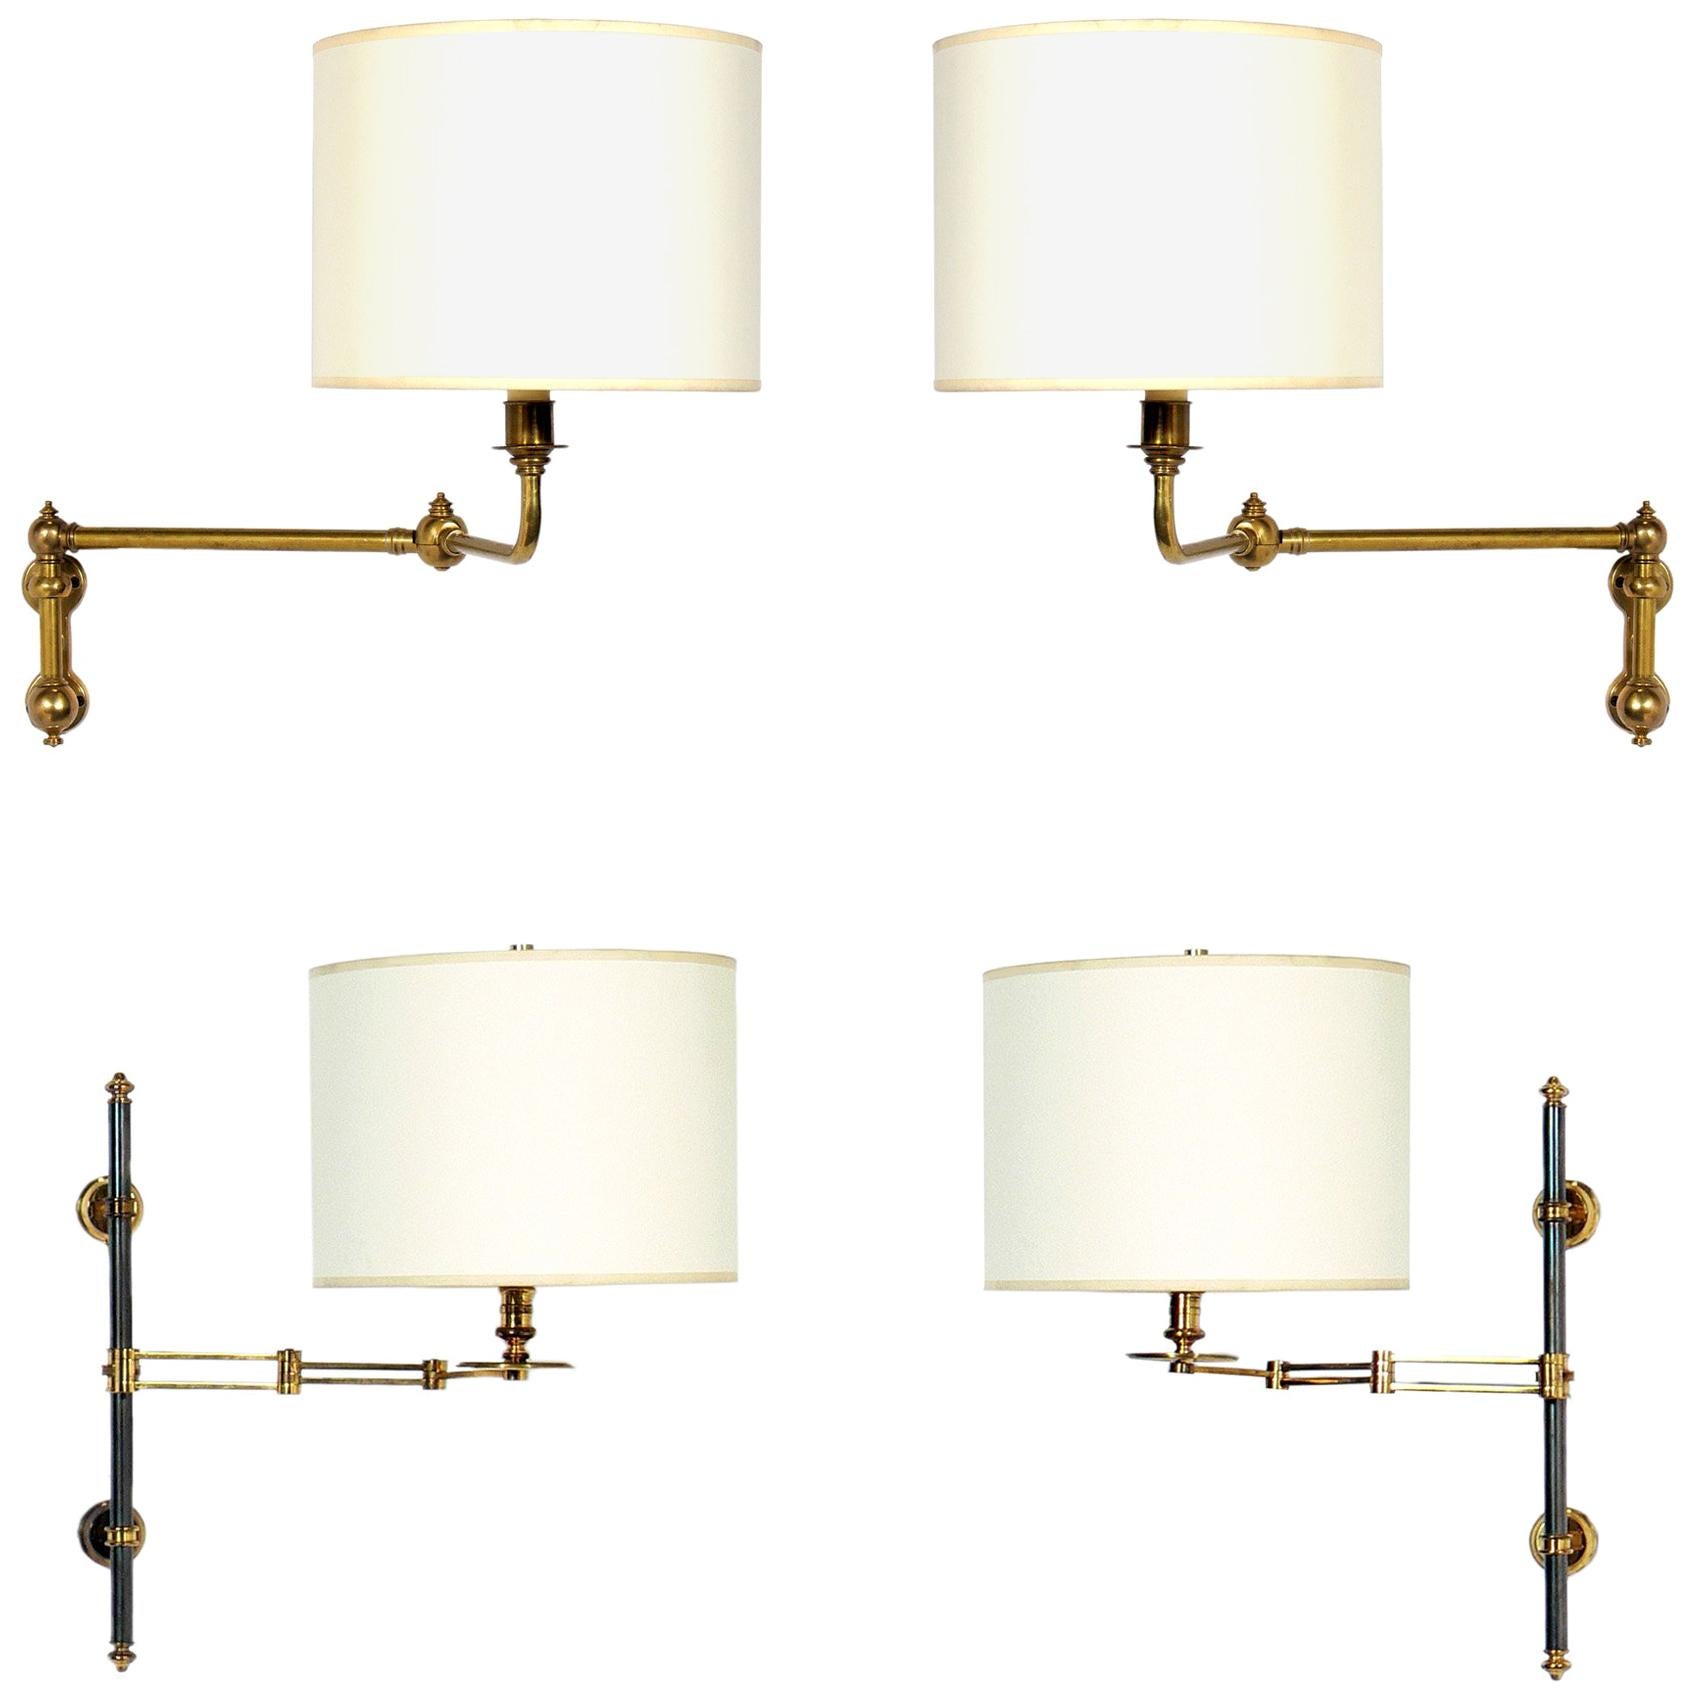 Selection of Brass Swing Arm Sconces